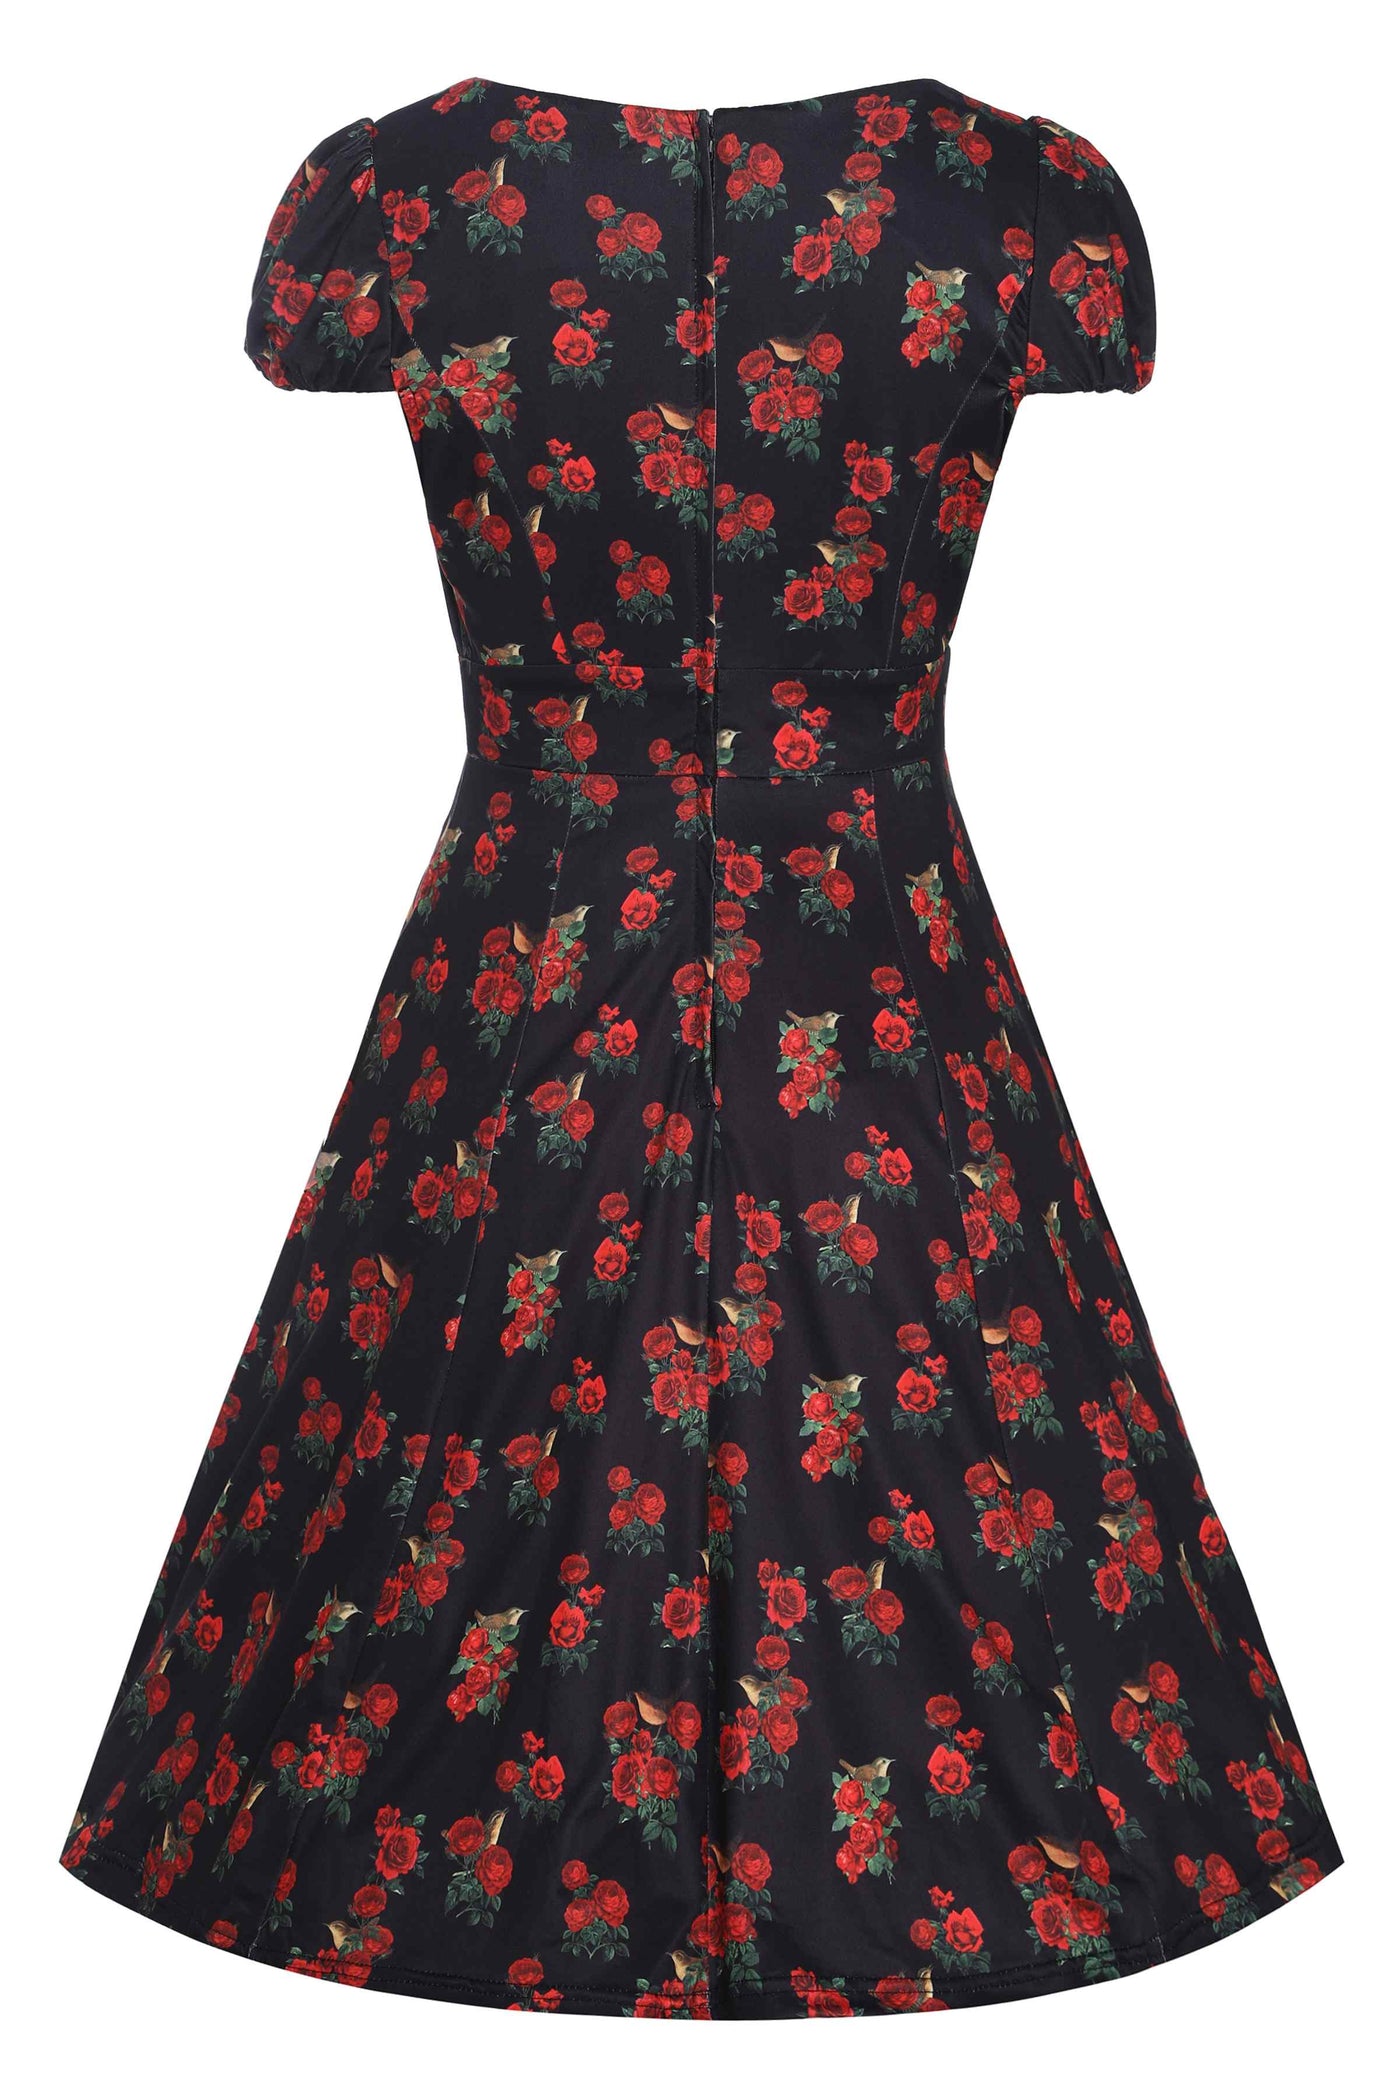 Back View of Red Rose and Bird Cap Sleeved Swing Dress in black